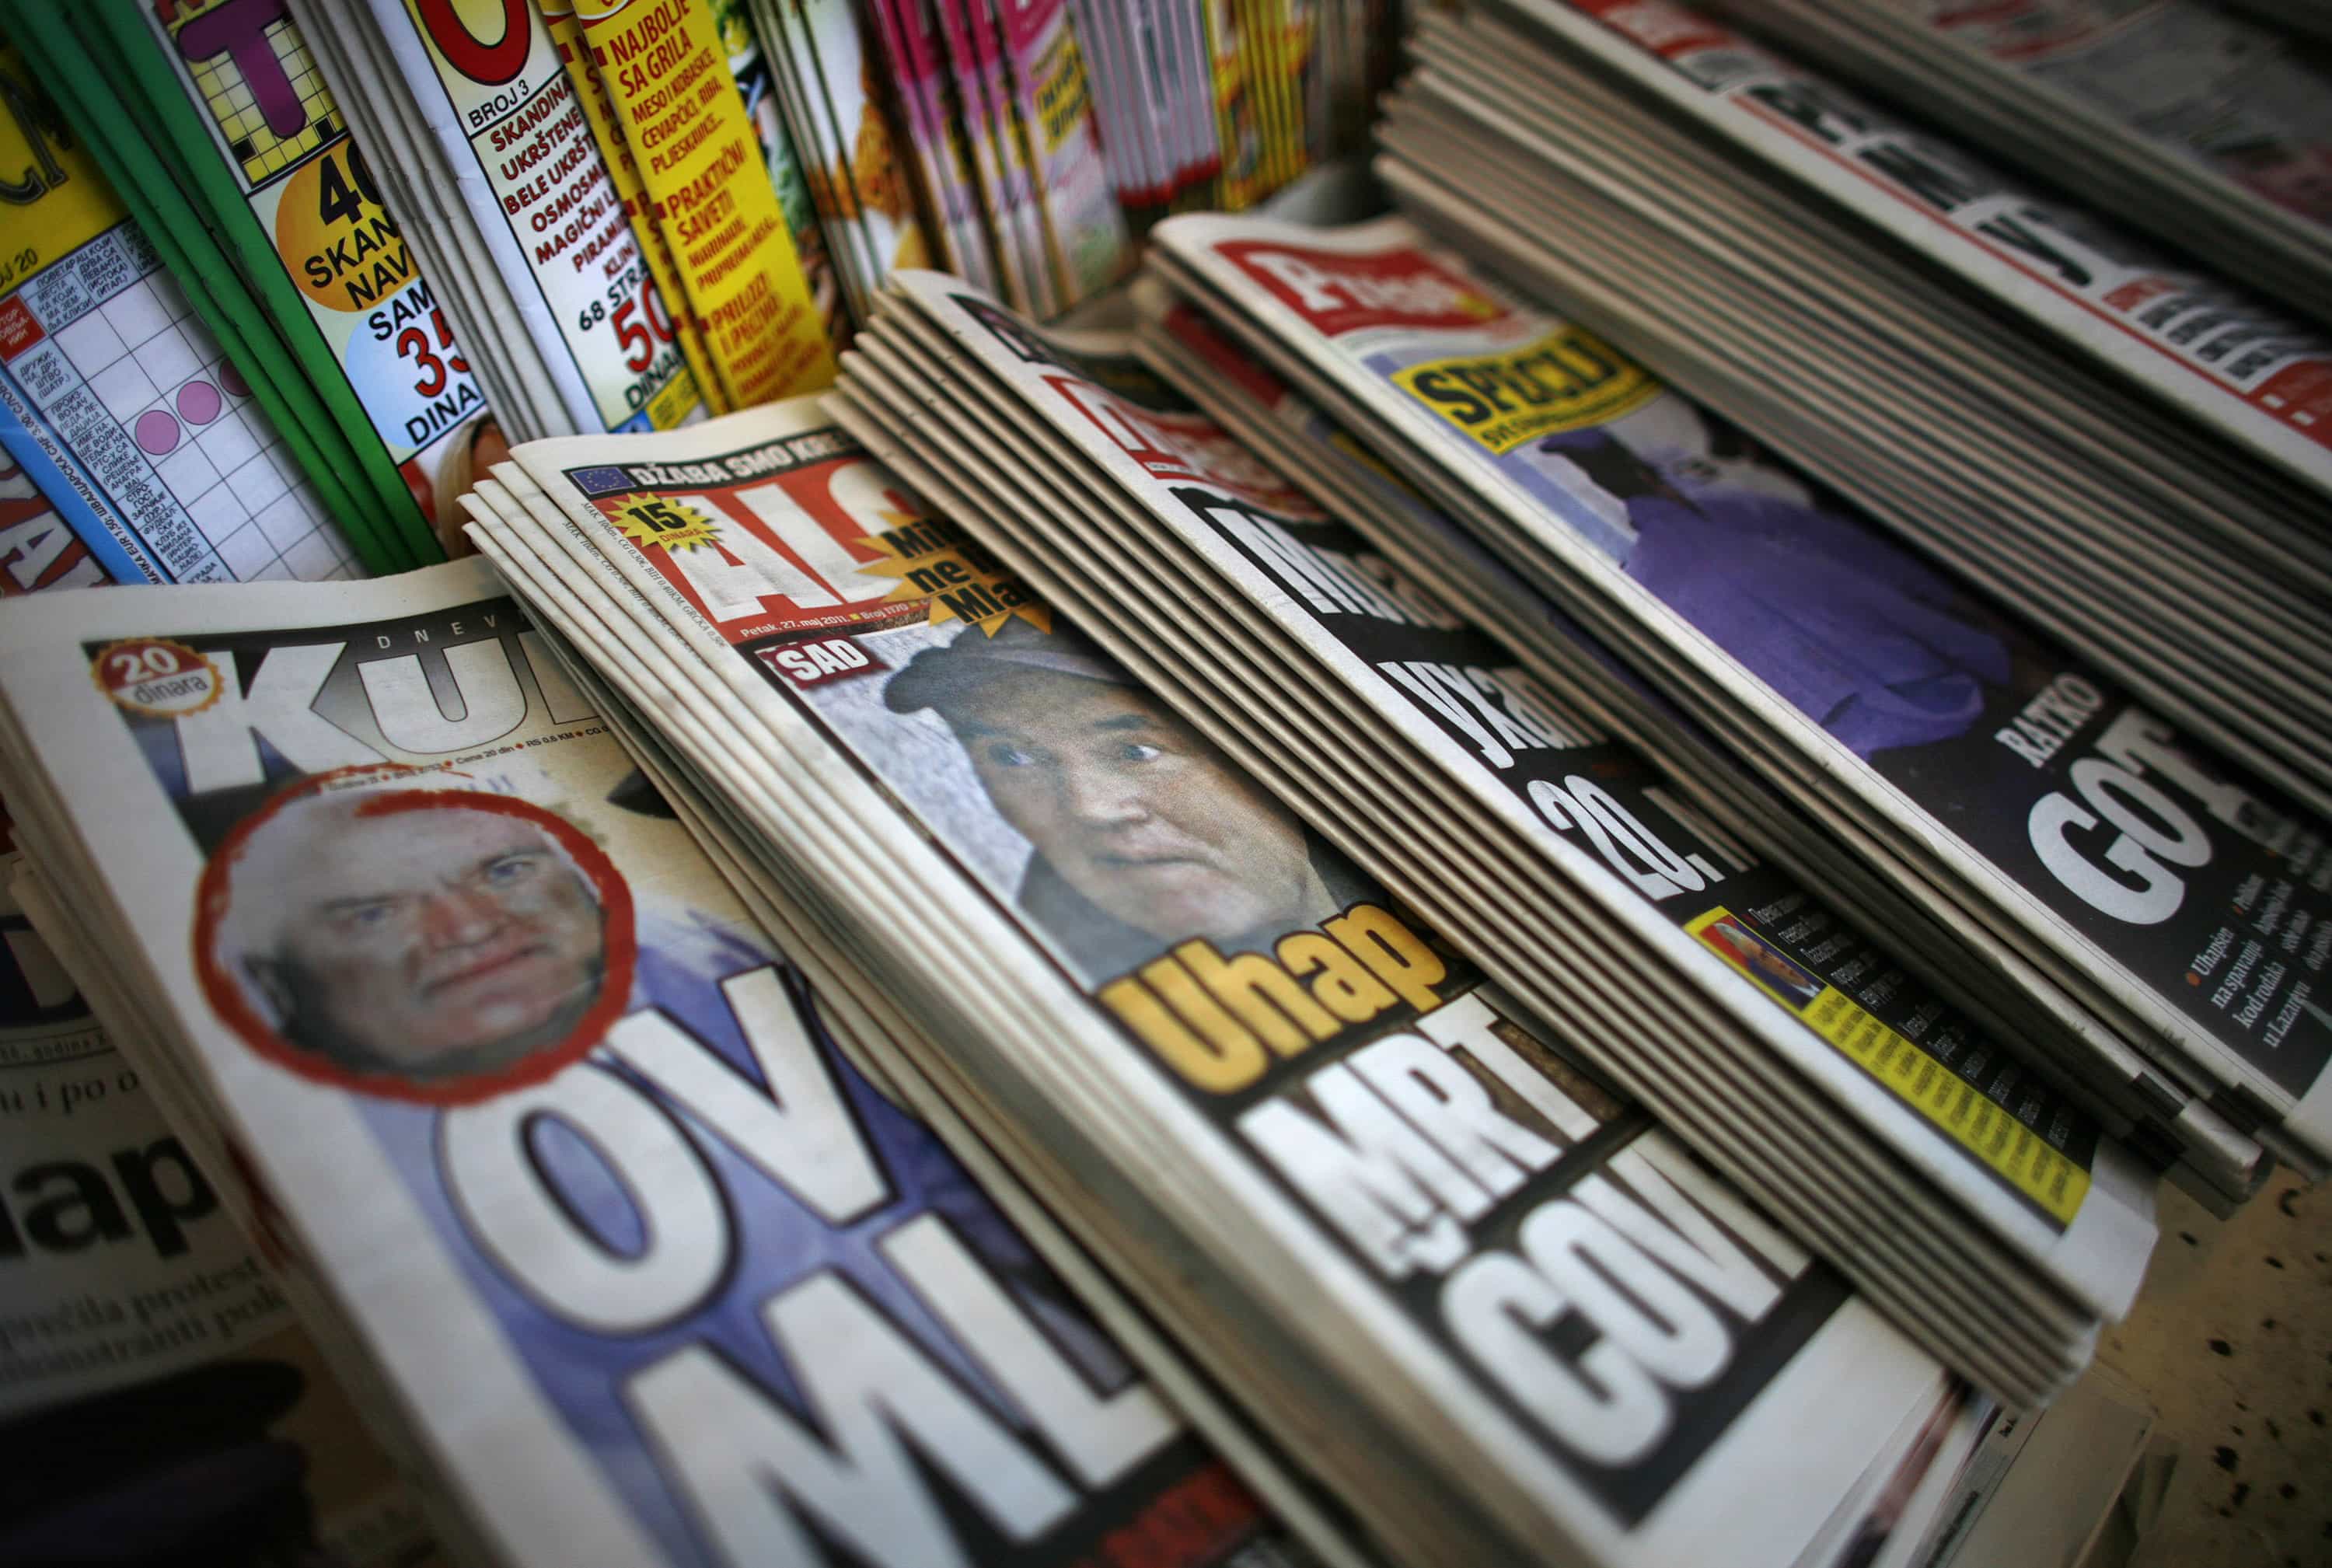 Newspapers with front pages reporting the arrest of Bosnian Serb wartime general Ratko Mladic, are displayed for sale at kiosk in central Belgrade, 27 May 27, 2011, REUTERS/Stoyan Nenov